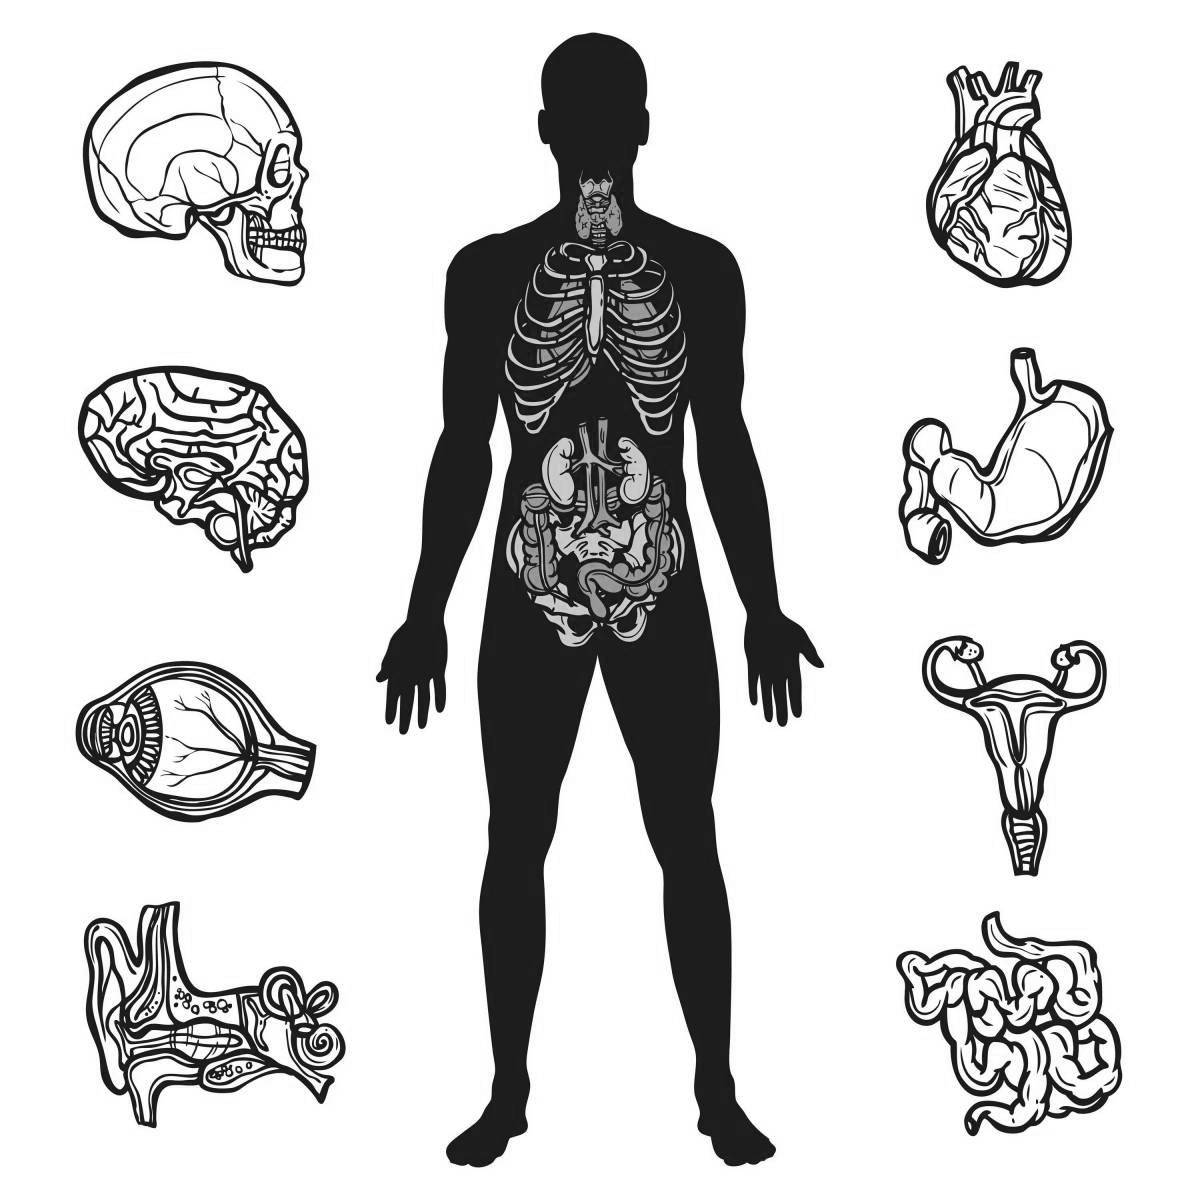 Glitter coloring book of the human body with internal organs for children